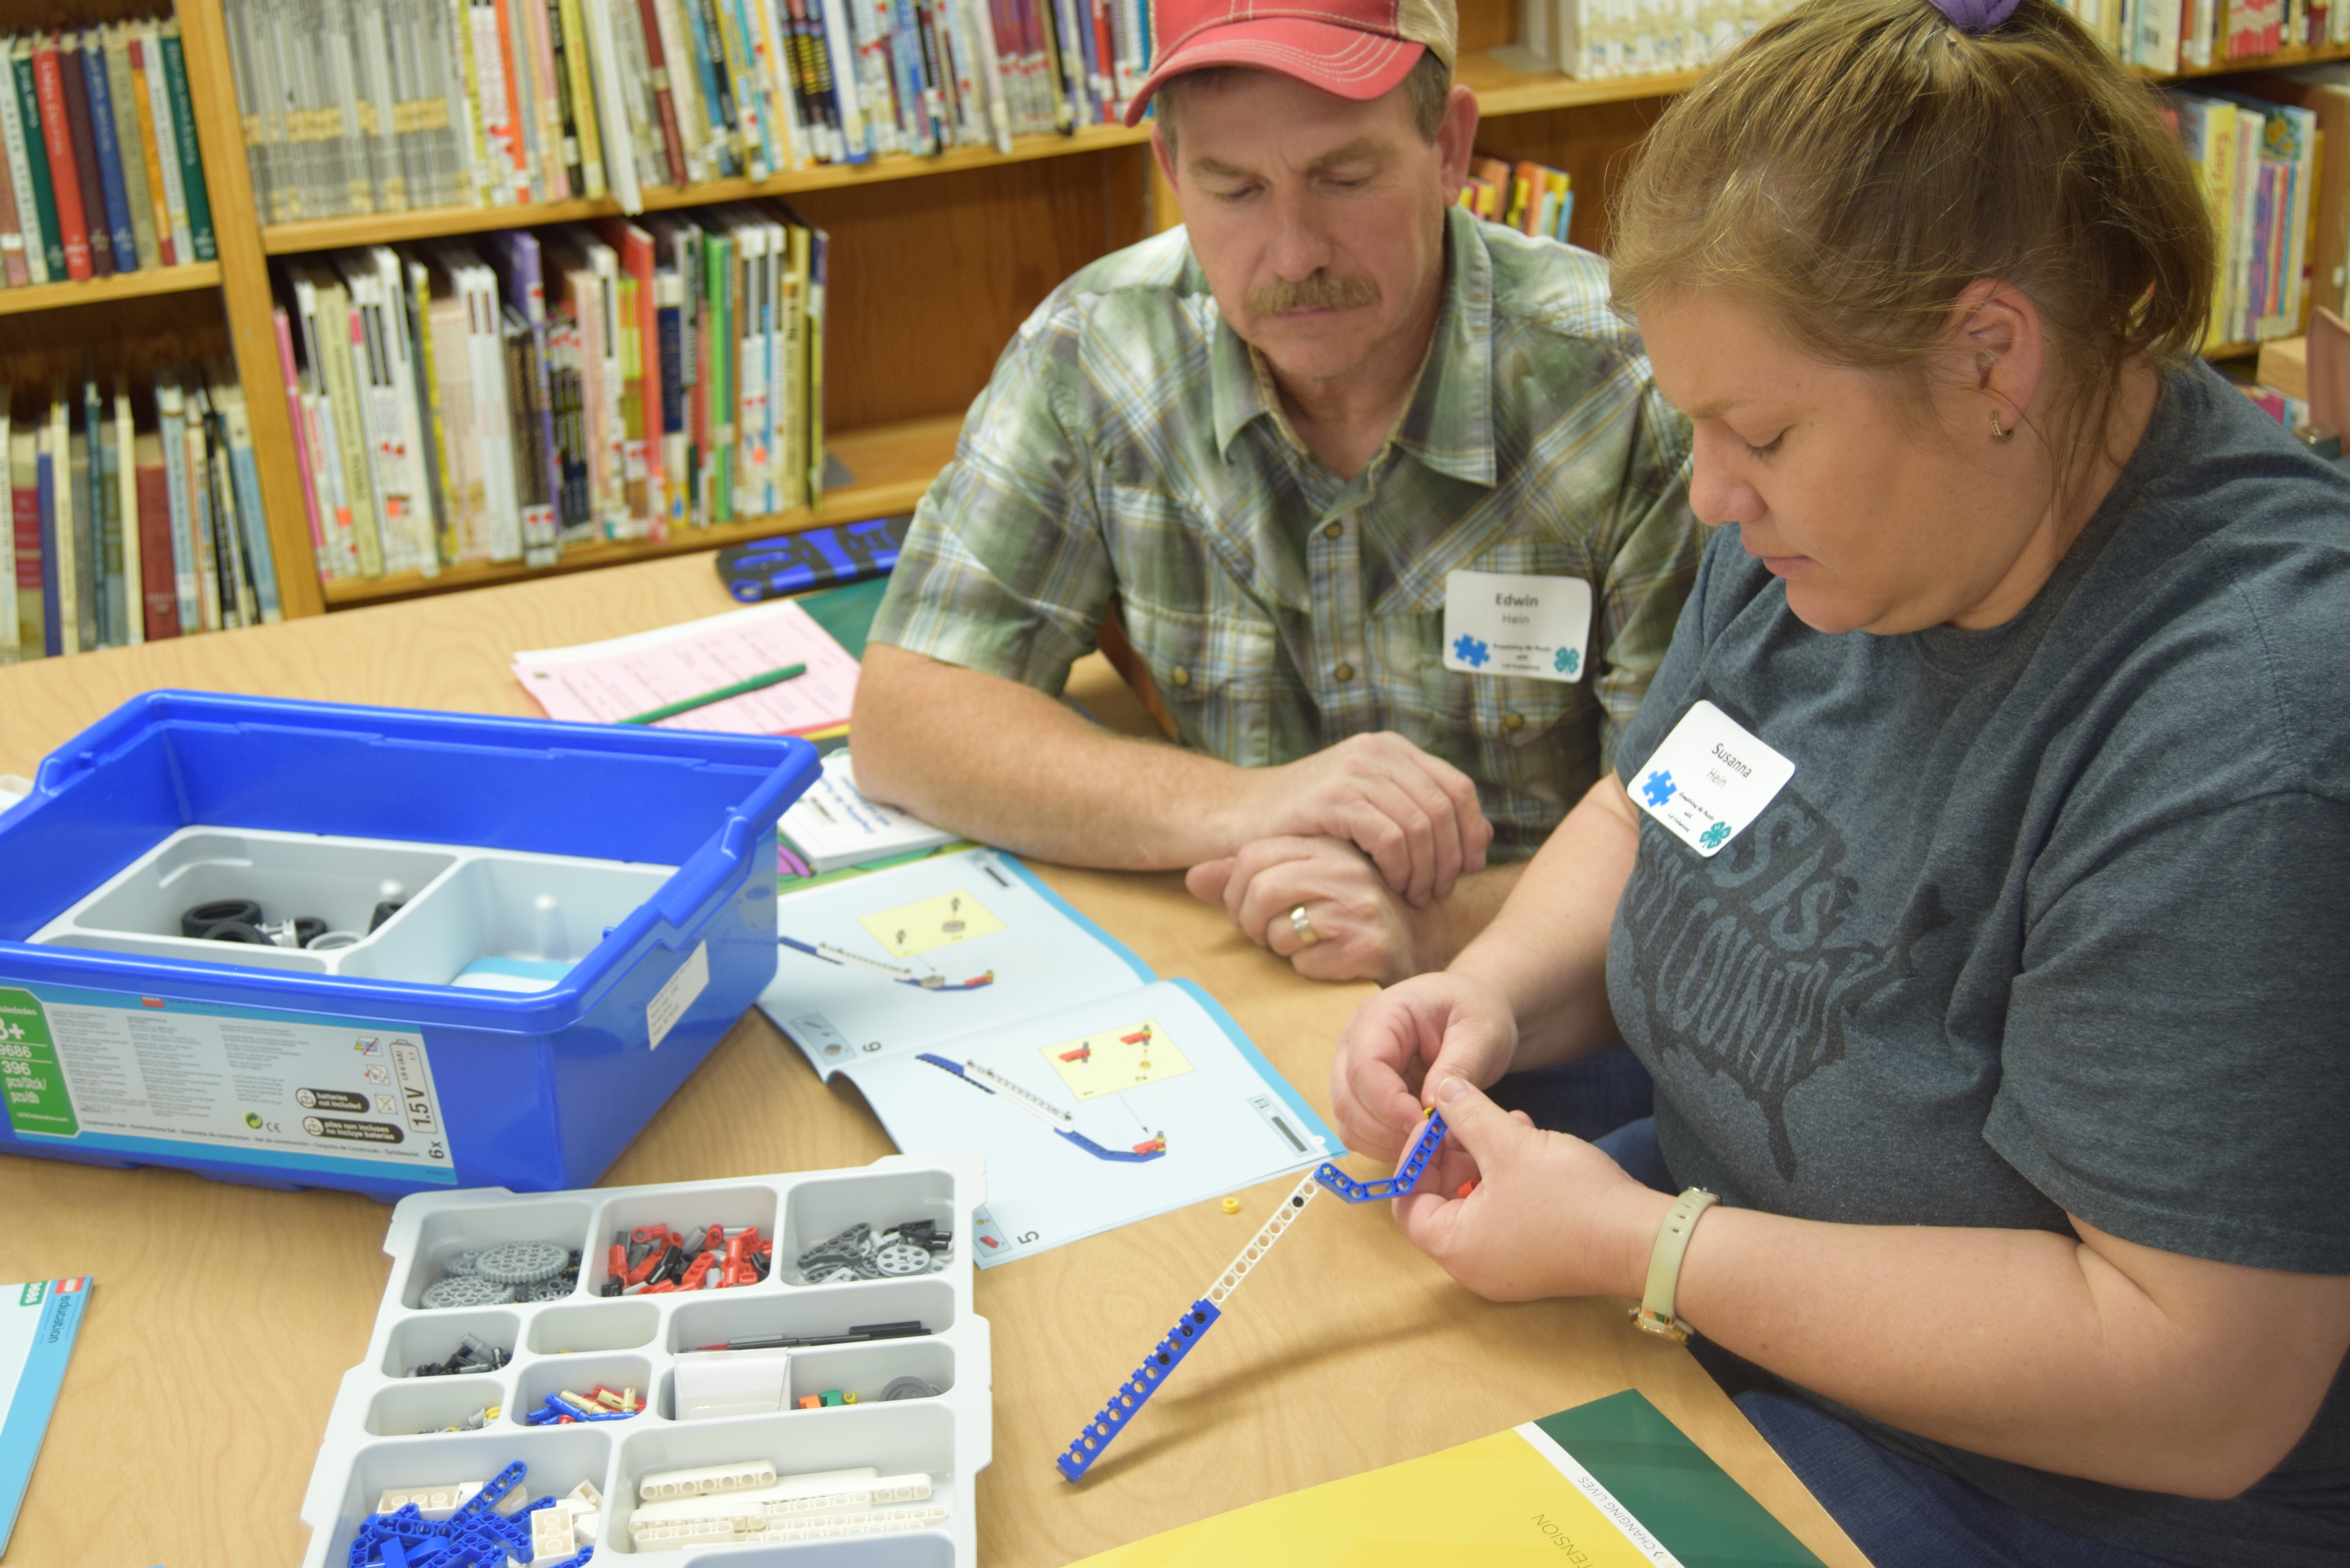 4-H volunteers Edwin and Susanna Hein of Rolette County attend a 4-H volunteer project training in Cando, N.D. (NDSU photo)